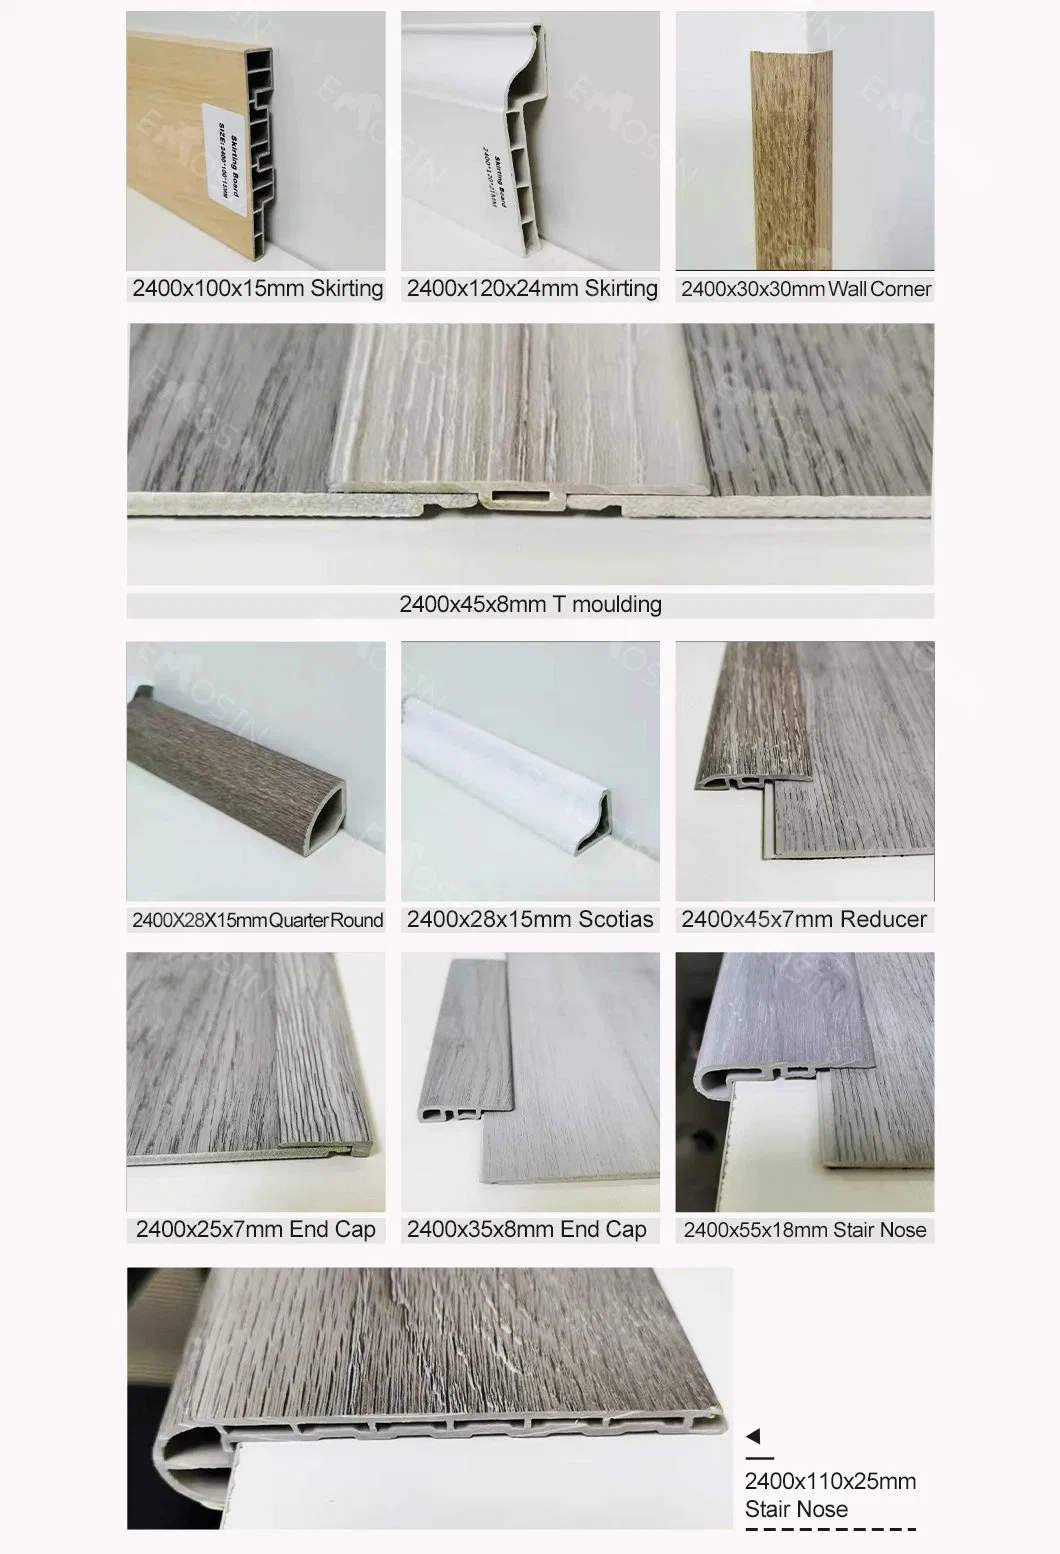 Cheap All Kinds of Plastic/PVC/Fiberboard/Spc/Laminate/Laminated/Solid/Vinyl Stair Nose Molding of Floor Accessories Manufacturer